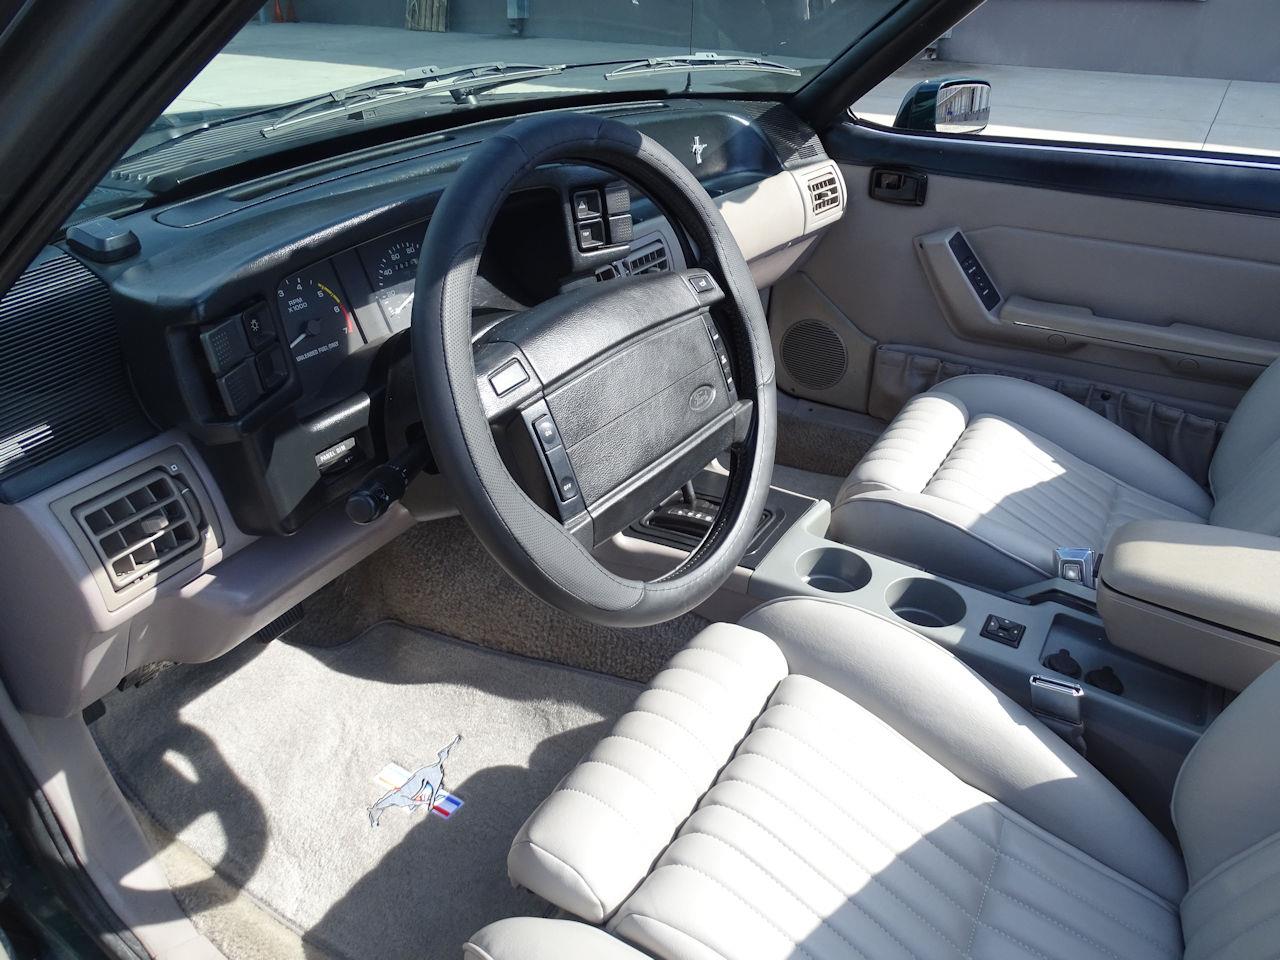 1991 Ford Mustang for sale in O'Fallon, IL – photo 79